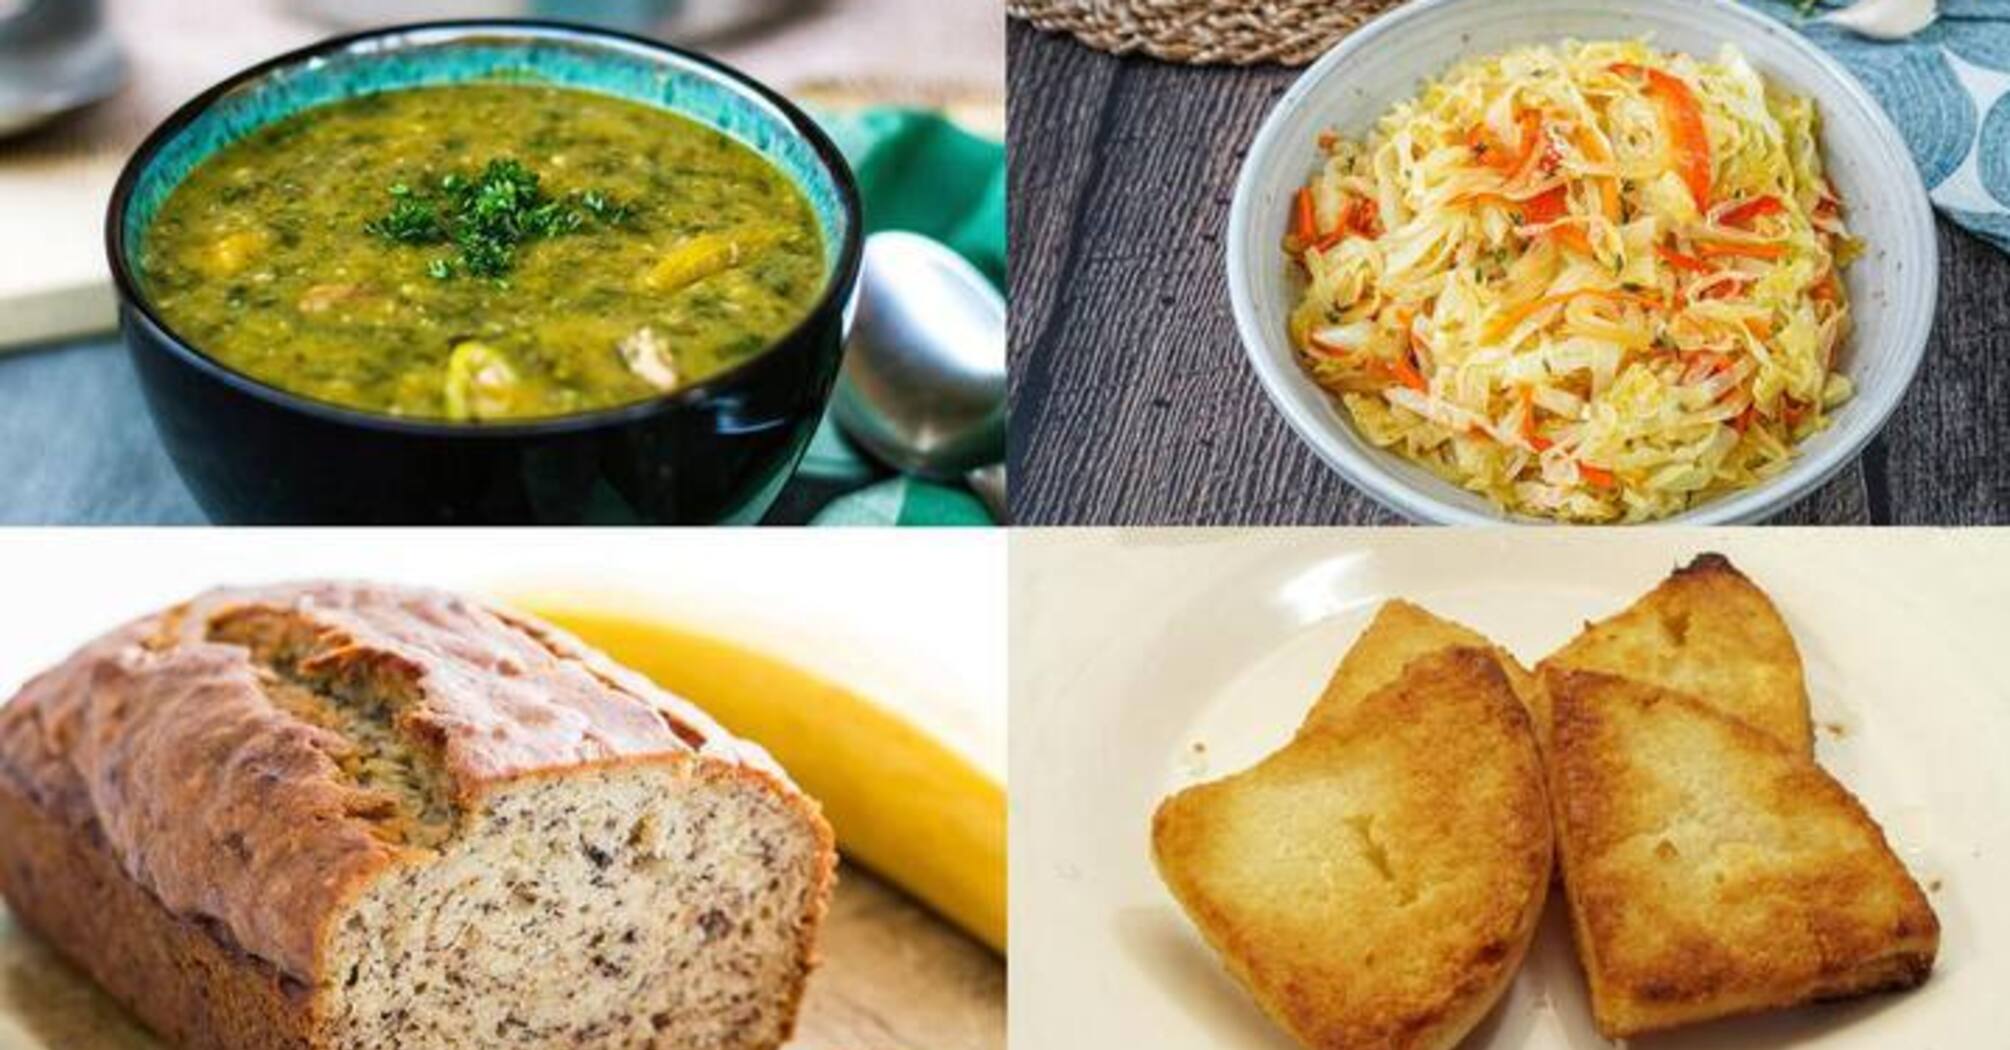 Banana bread and crazy vegetables: popular dishes in Jamaica